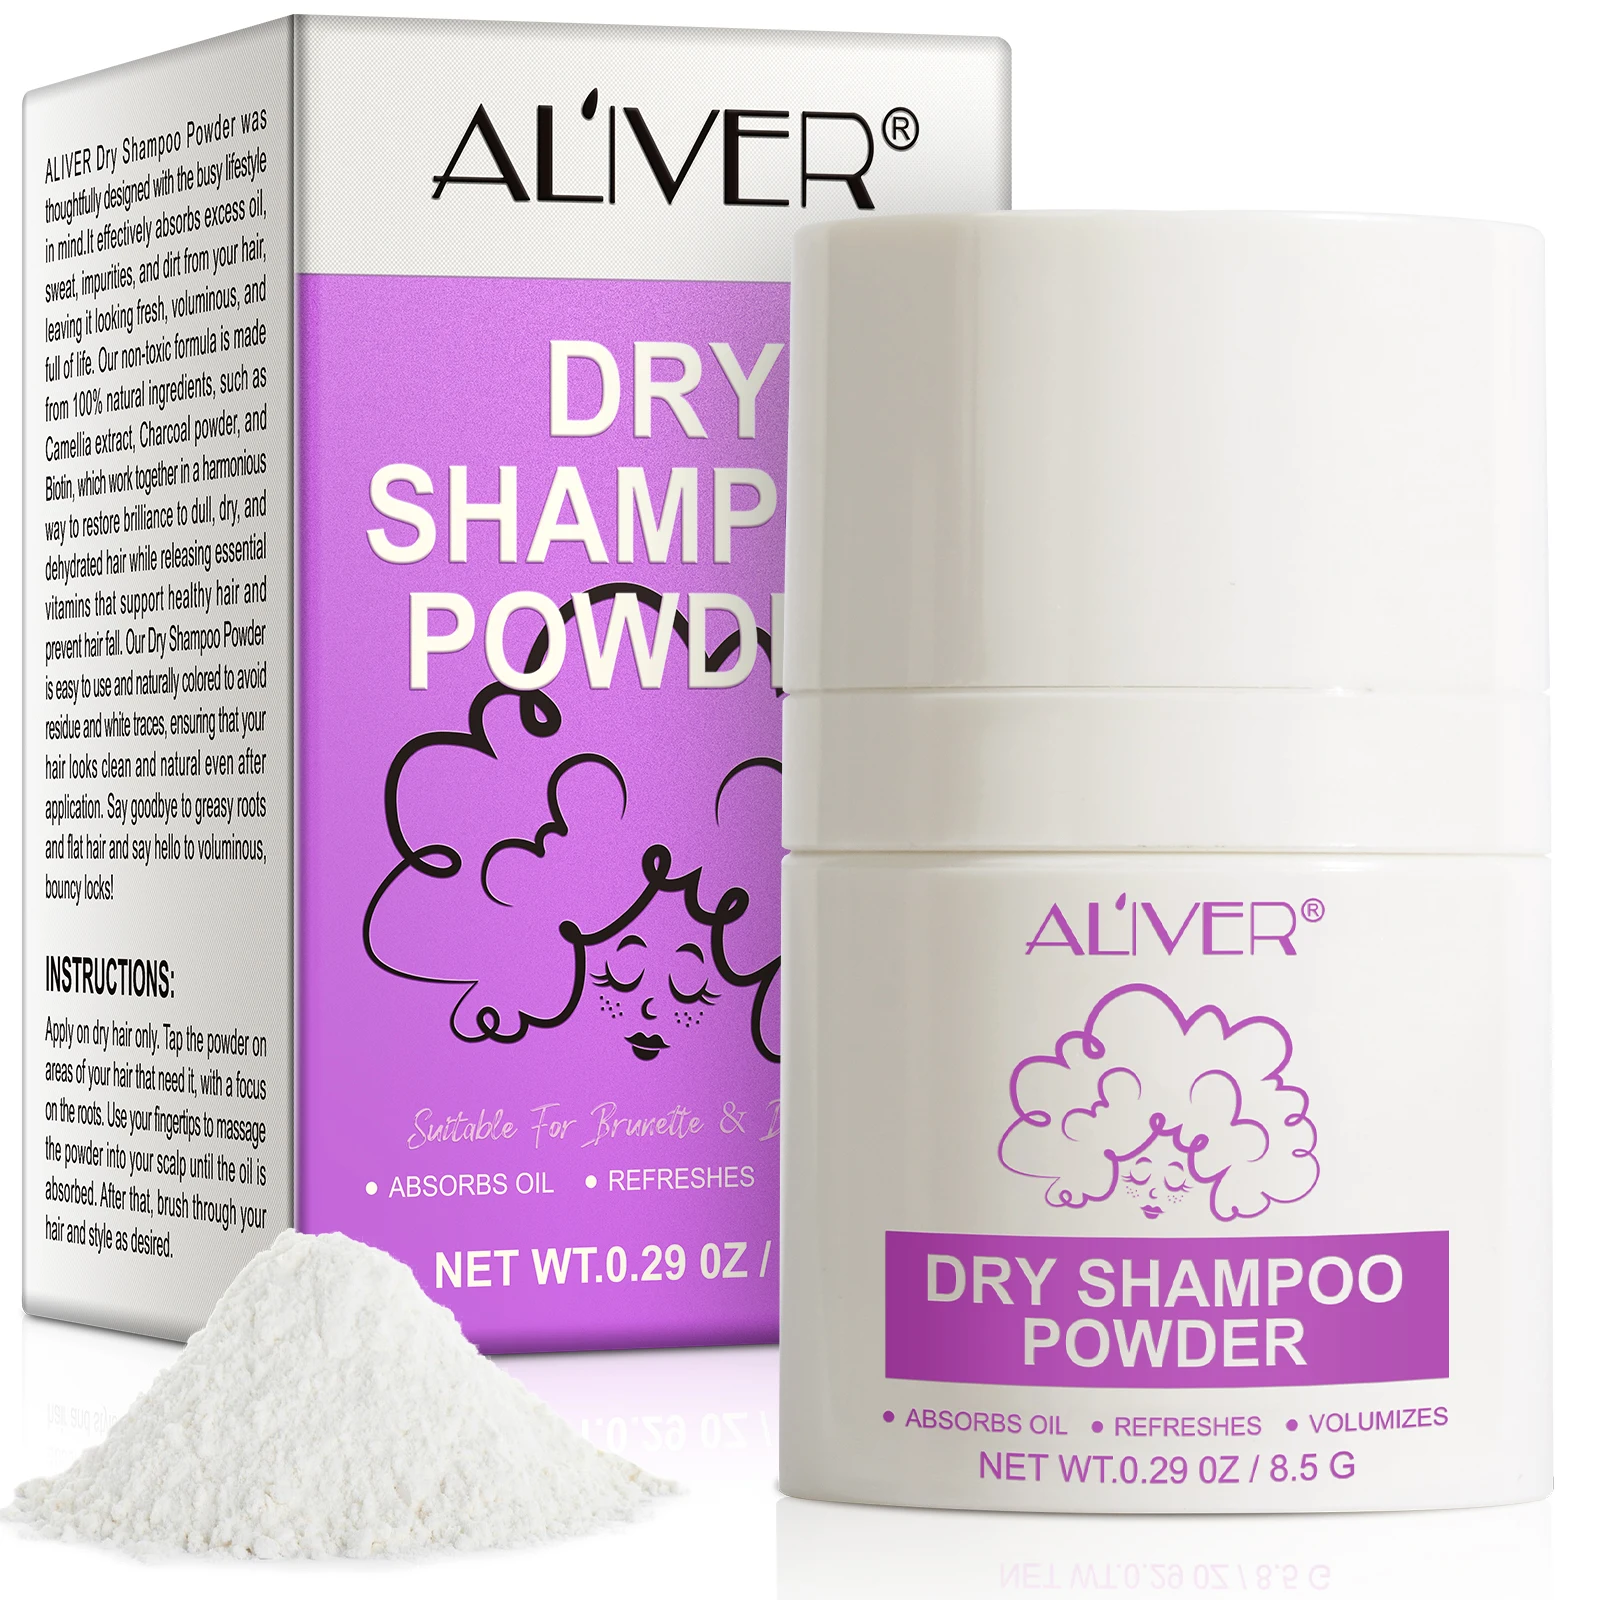 

ALIVER absorbs oil refreshes 8.5g private label powdered dry shampoo manufacturers dry shampoo powder eco friendly